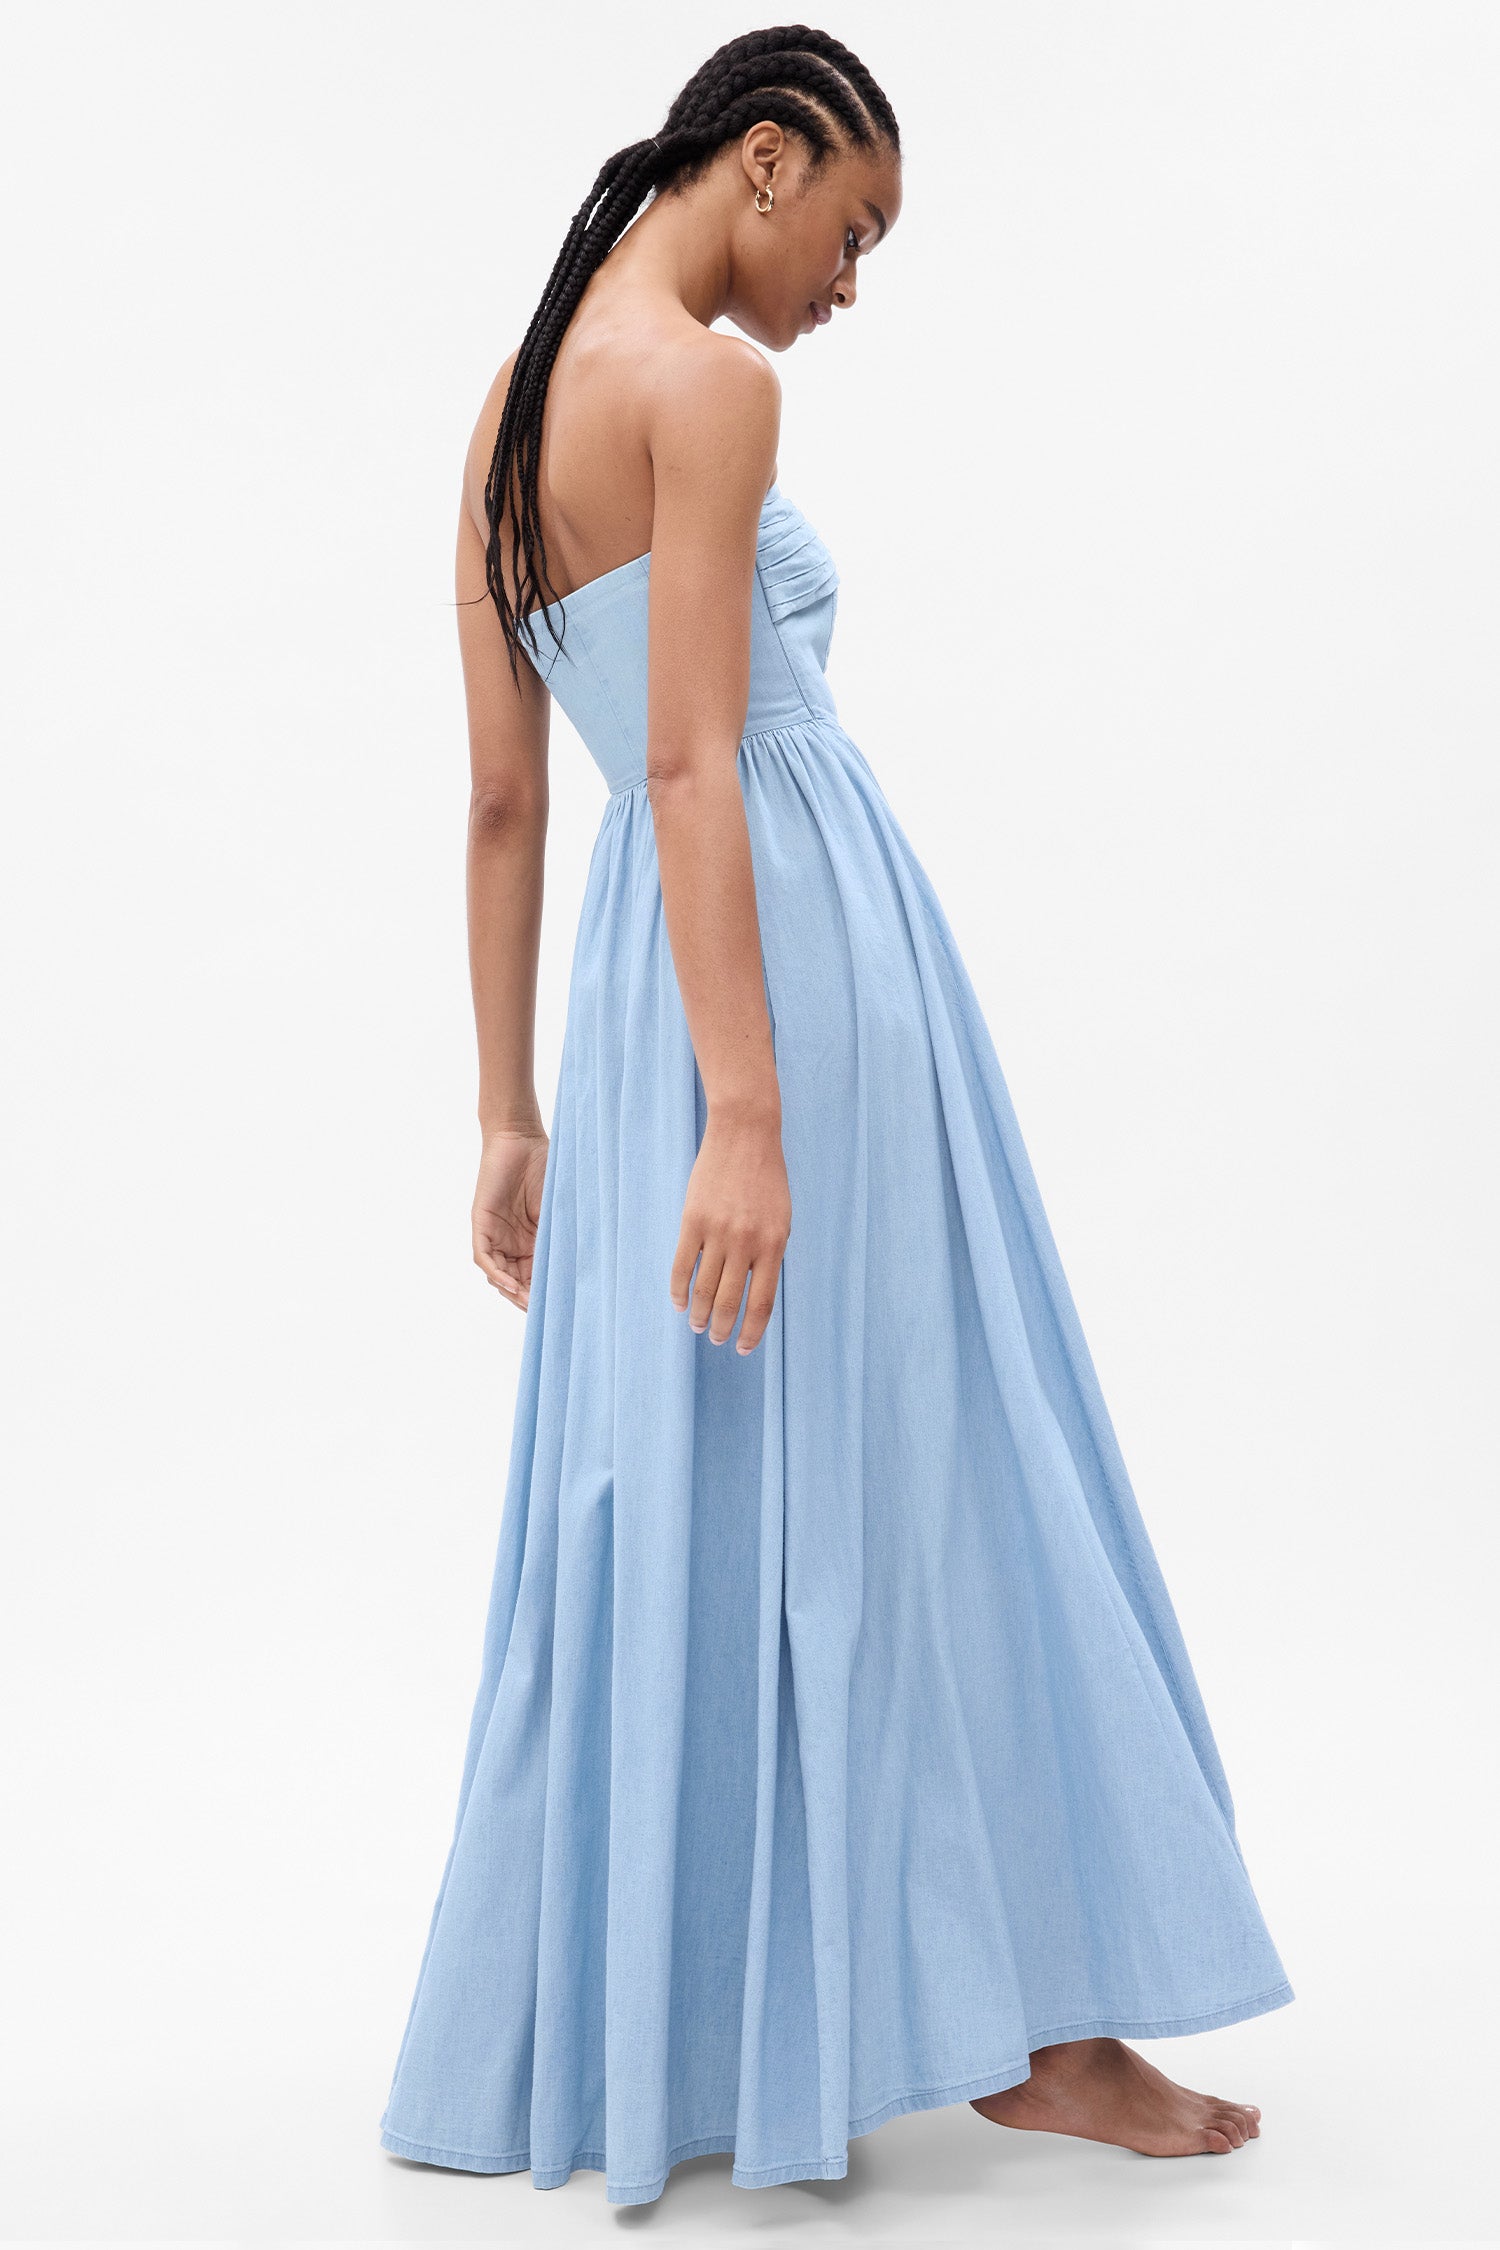 Side image of model wearing blue denim strapless maxi dress with corset top and tiered skirt